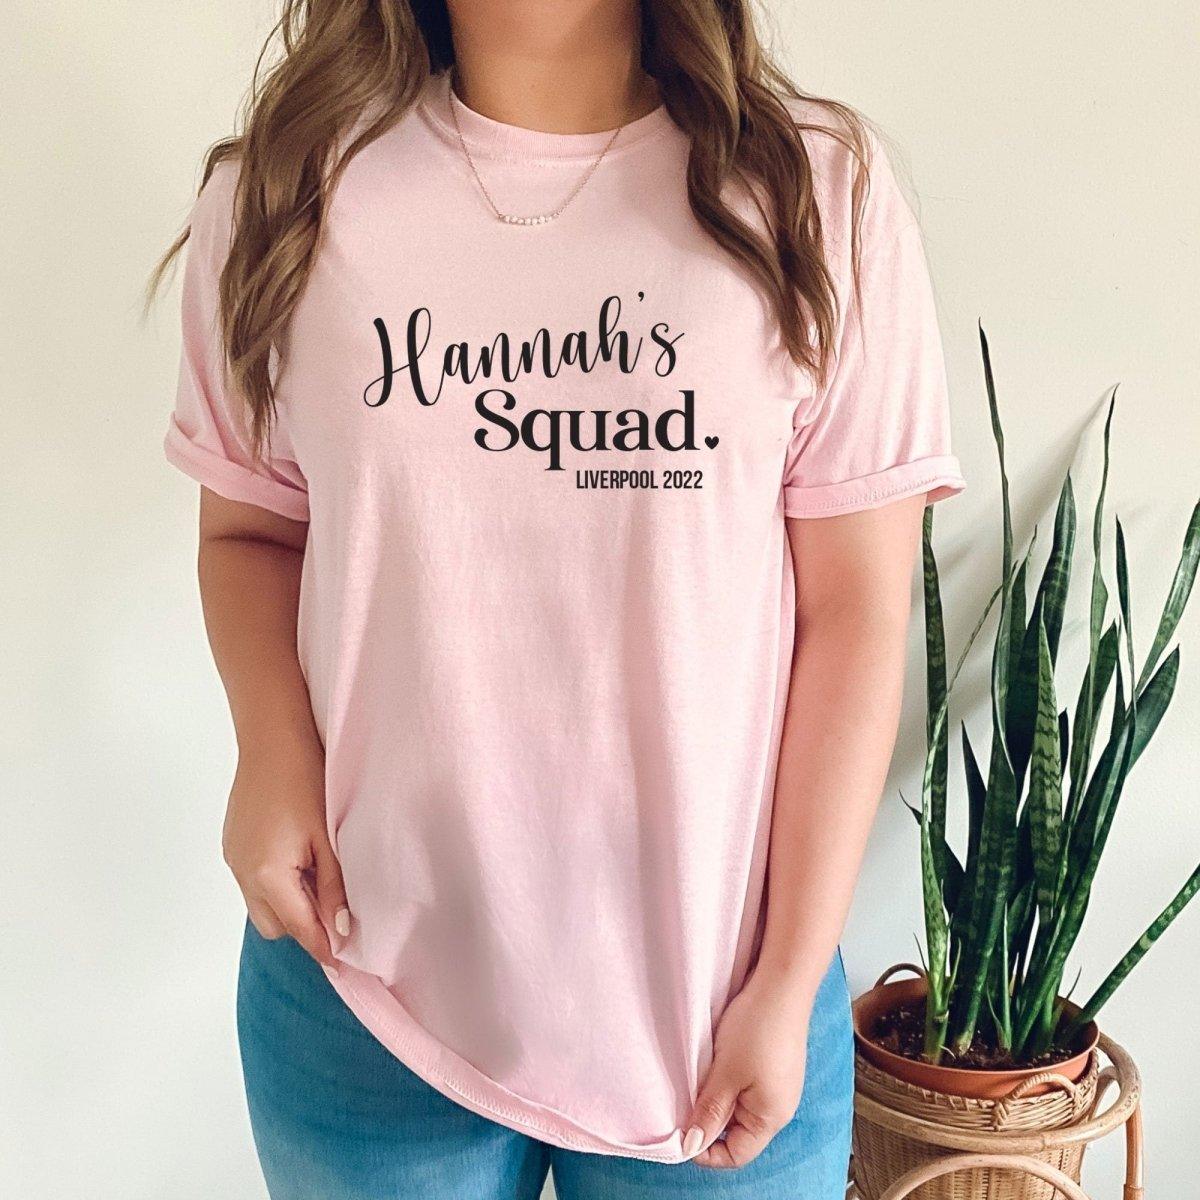 Bride Squad T-shirt, Bridal Party T-shirts, Organic Bride Squad Tops, Hen Night Hen Vibes T-shirts, Hen Tops, Maid of Honour Tops, Bride - Amy Lucy